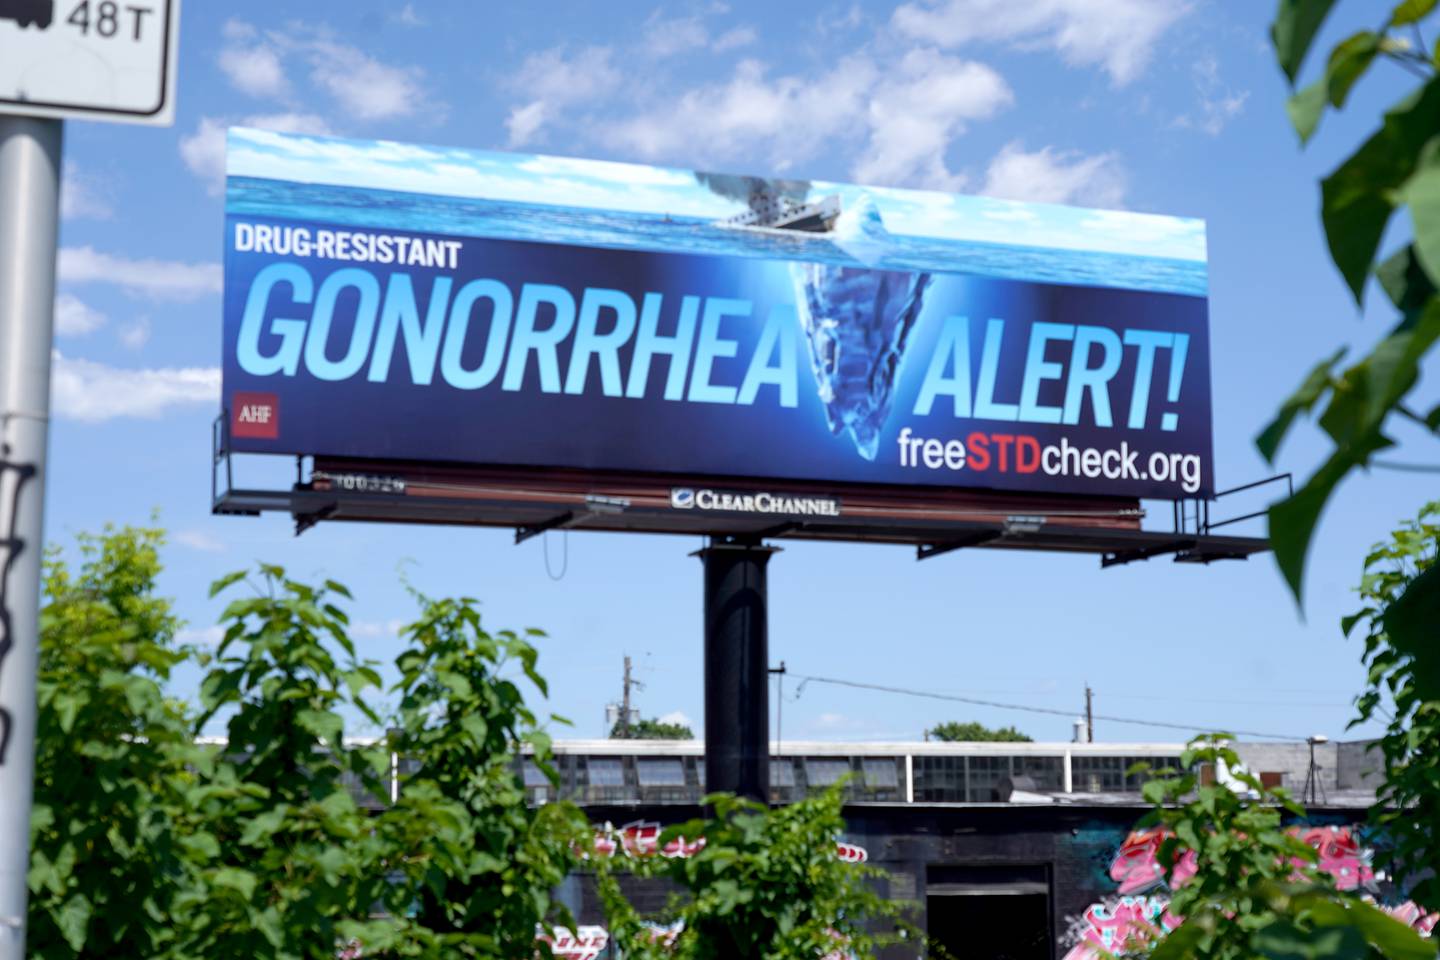 Cases of gonorrhea and other STIs have been rising, so a downtown Baltimore clinic run by AIDS Healthcare Foundation put up a giant in-your-face billboard off I-83 on th 28th Street exit.